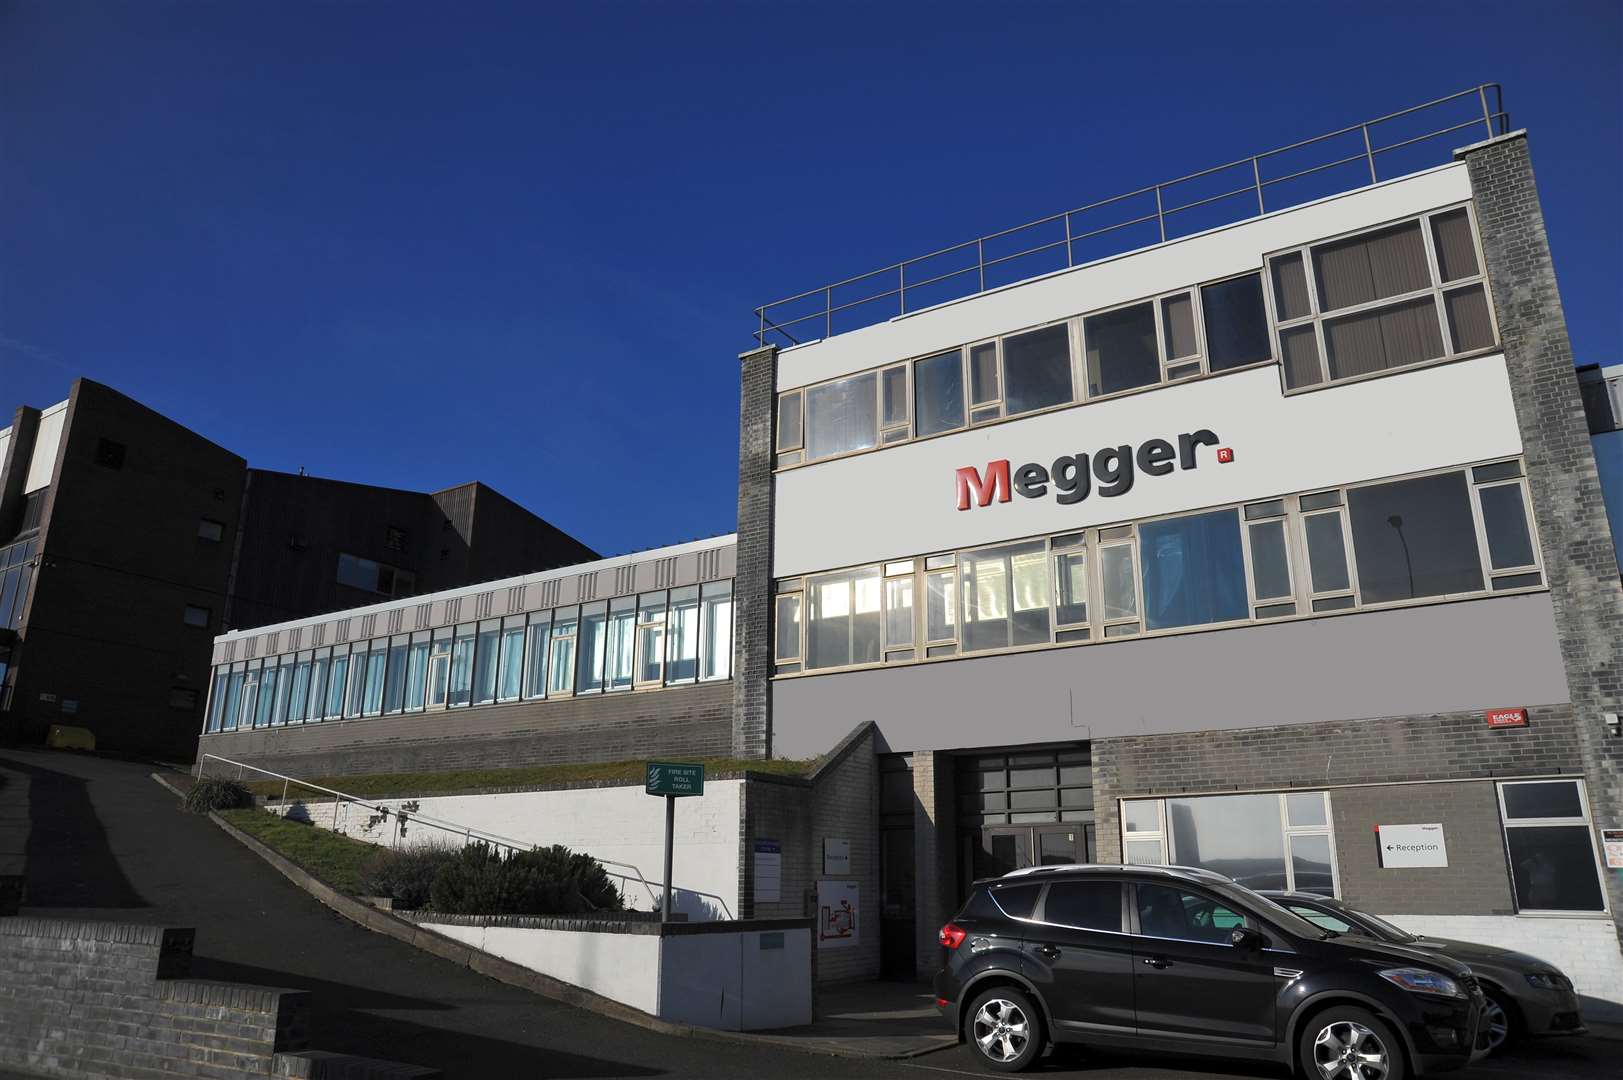 Megger, based in Dover, have been awarded a £138m loan. Picture: Megger